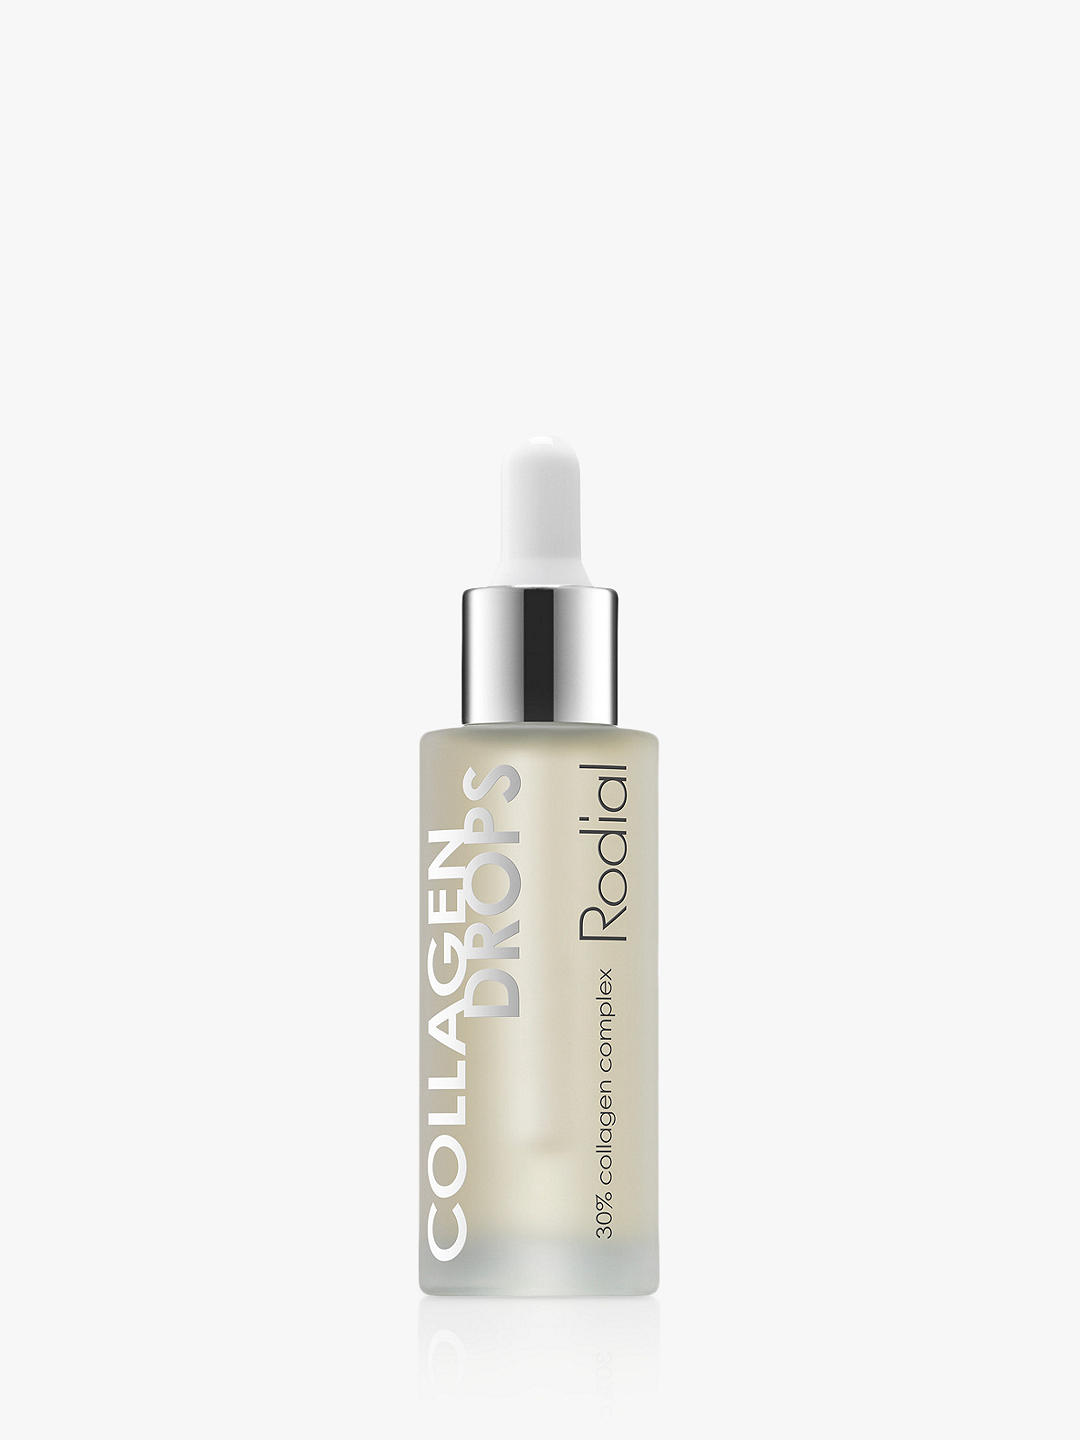 Rodial Collagen 30% Booster Drops, 30ml 1